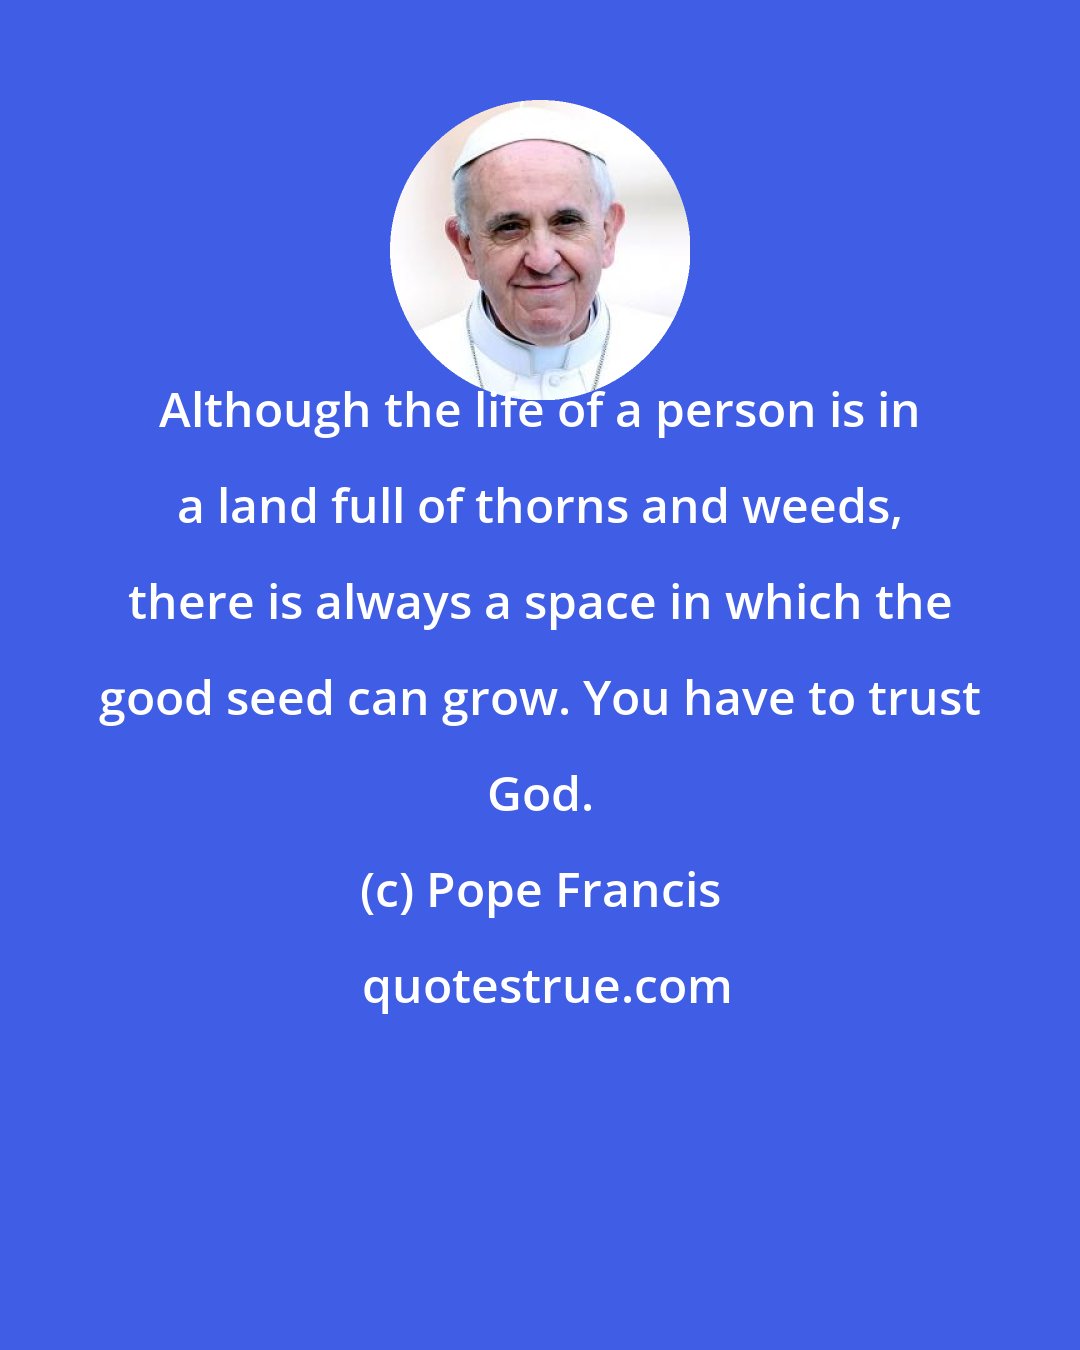 Pope Francis: Although the life of a person is in a land full of thorns and weeds, there is always a space in which the good seed can grow. You have to trust God.